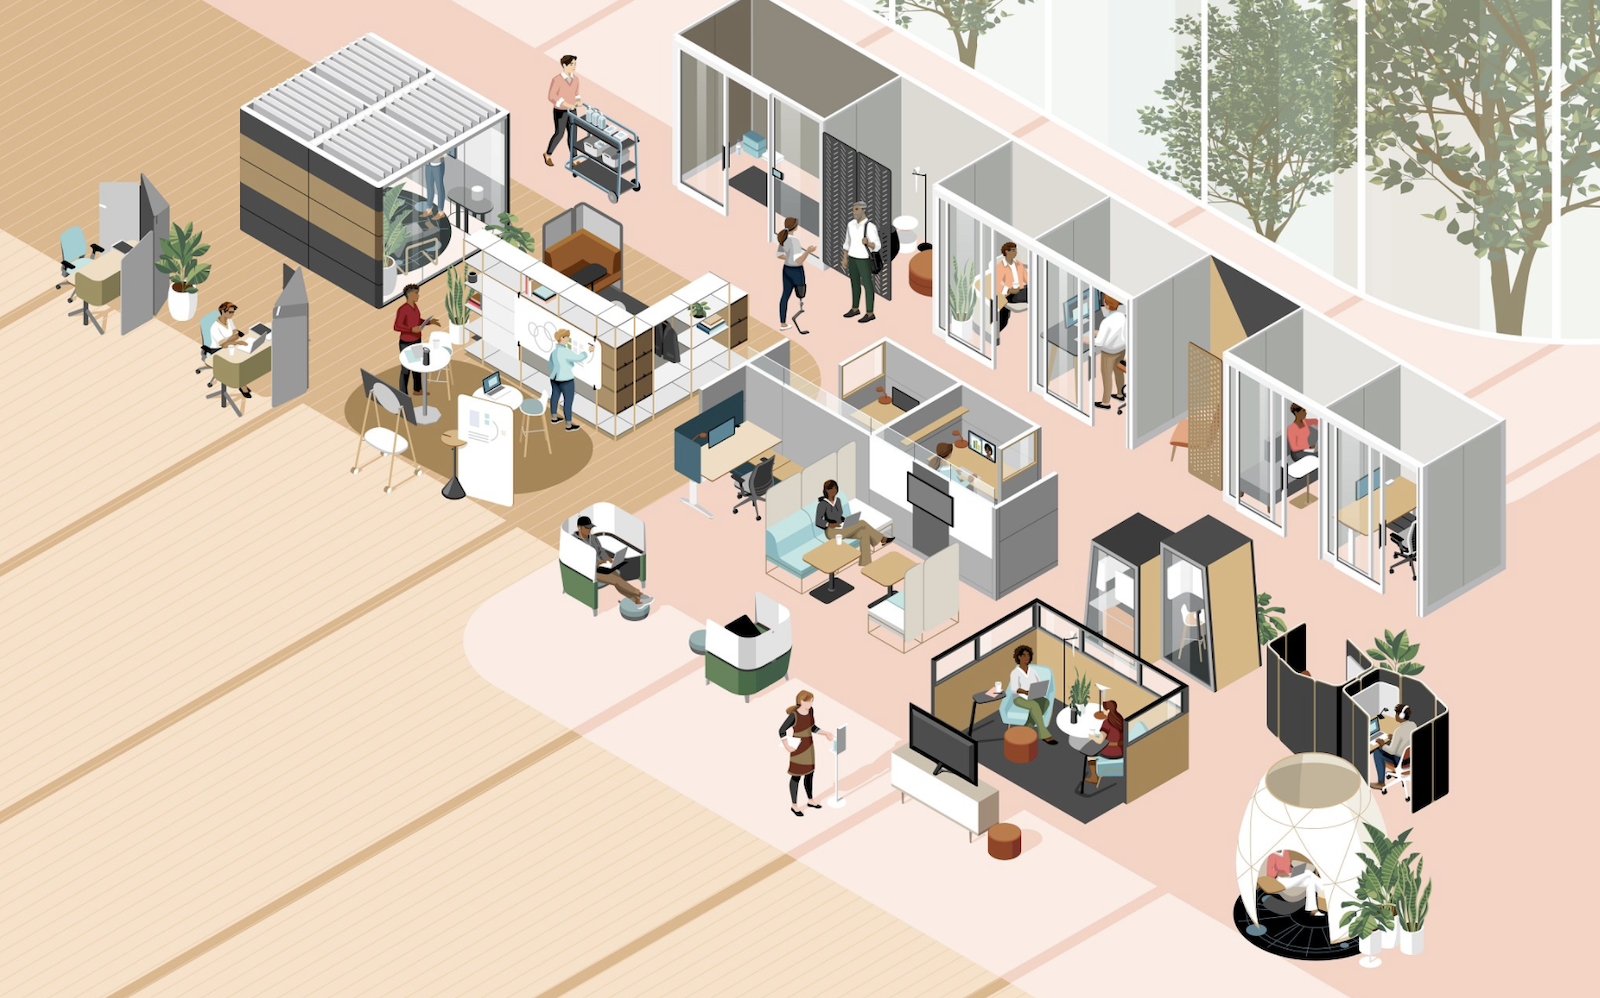 What the post pandemic workplace will look like according to Steelcase